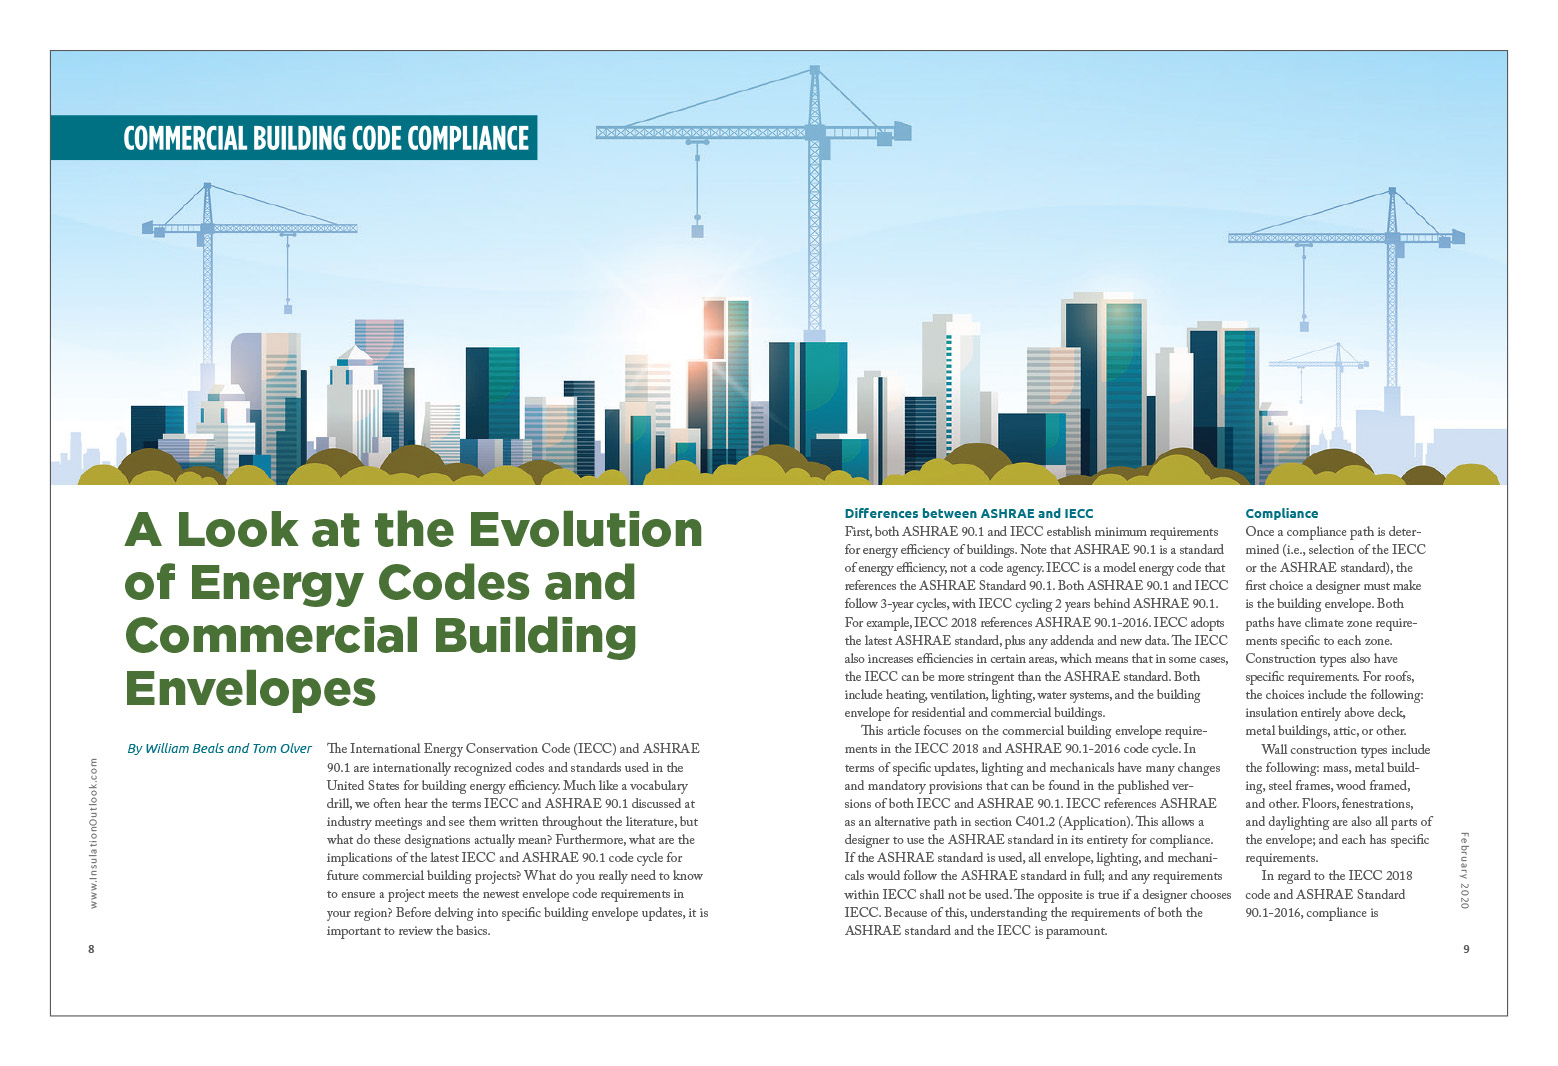 Commercial Building Code Compliance A Look at the Evolution of Energy